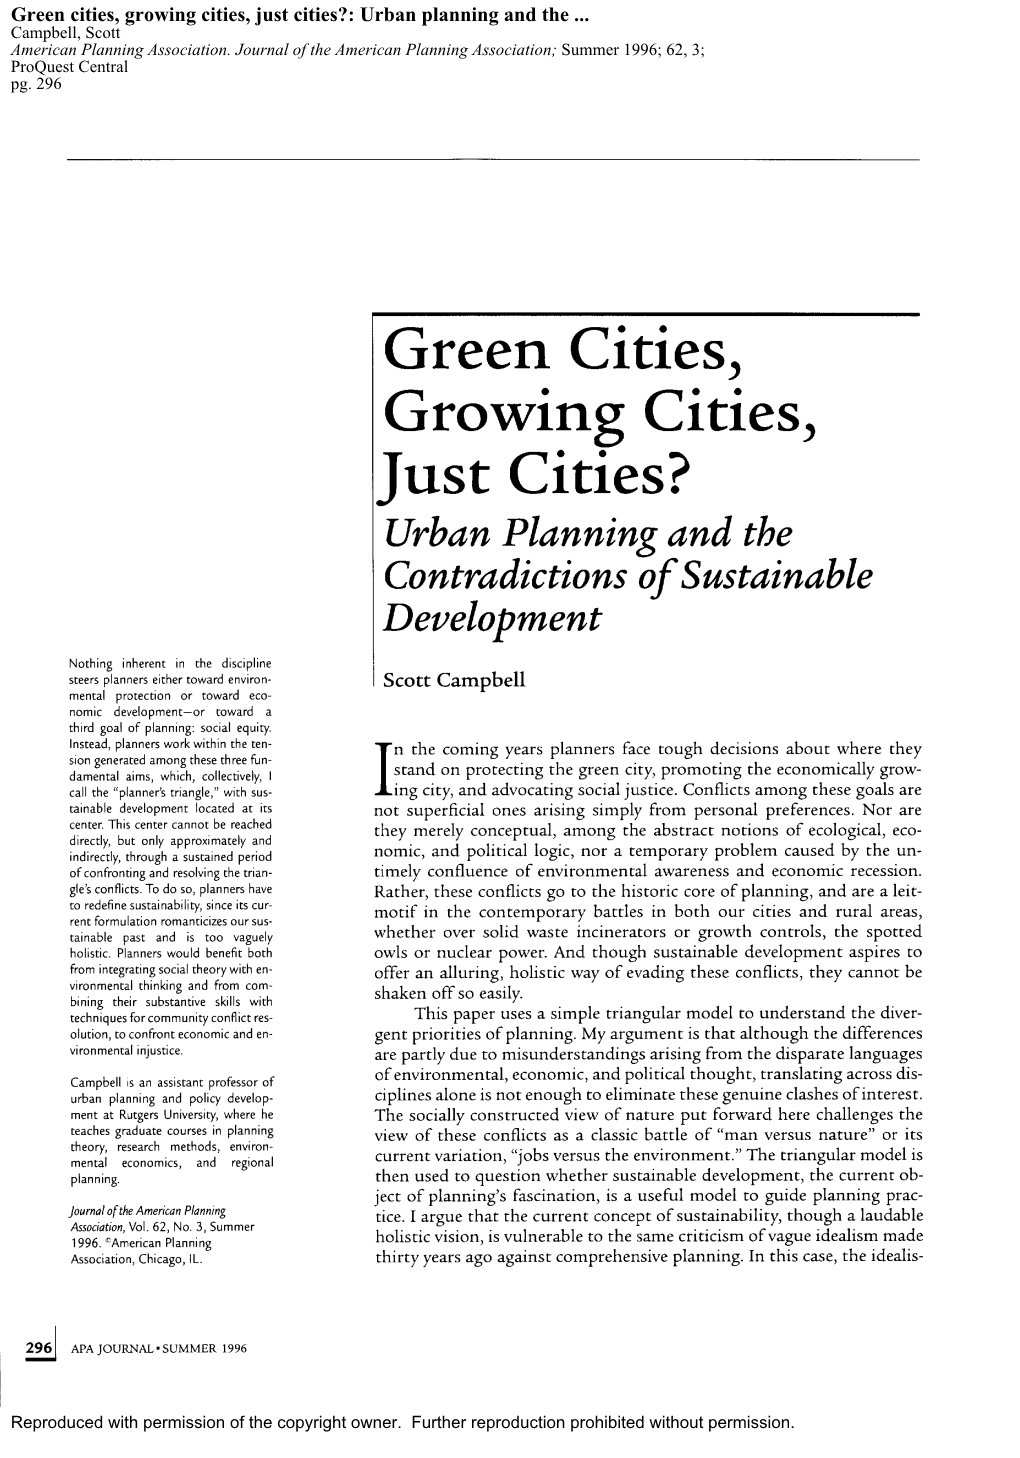 Green Cities, Growing Cities, Just Cities?: Urban Planning and the